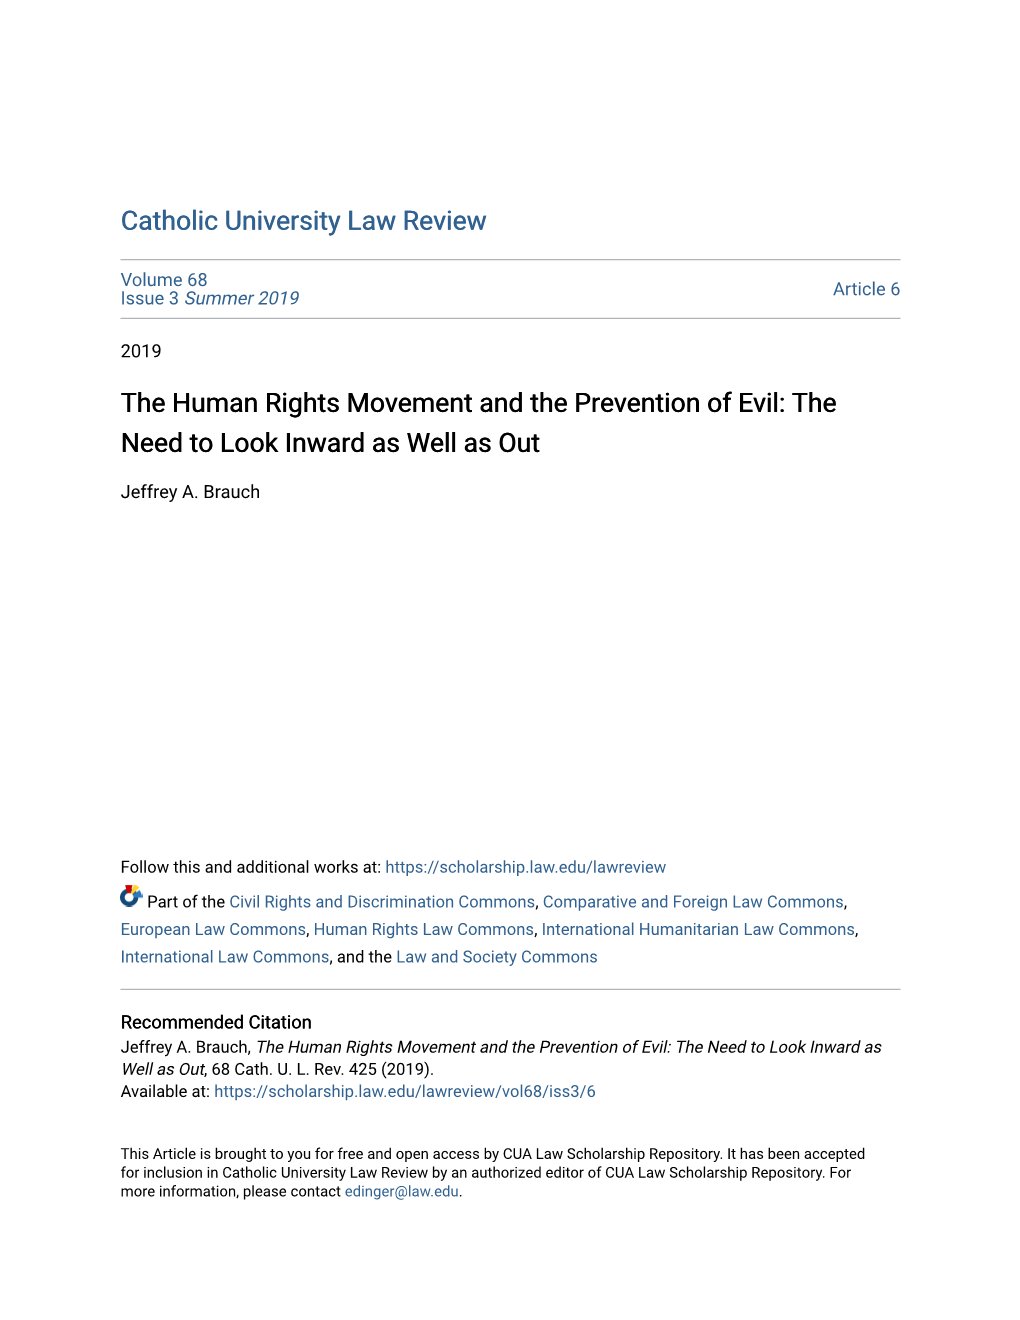 The Human Rights Movement and the Prevention of Evil: the Need to Look Inward As Well As Out